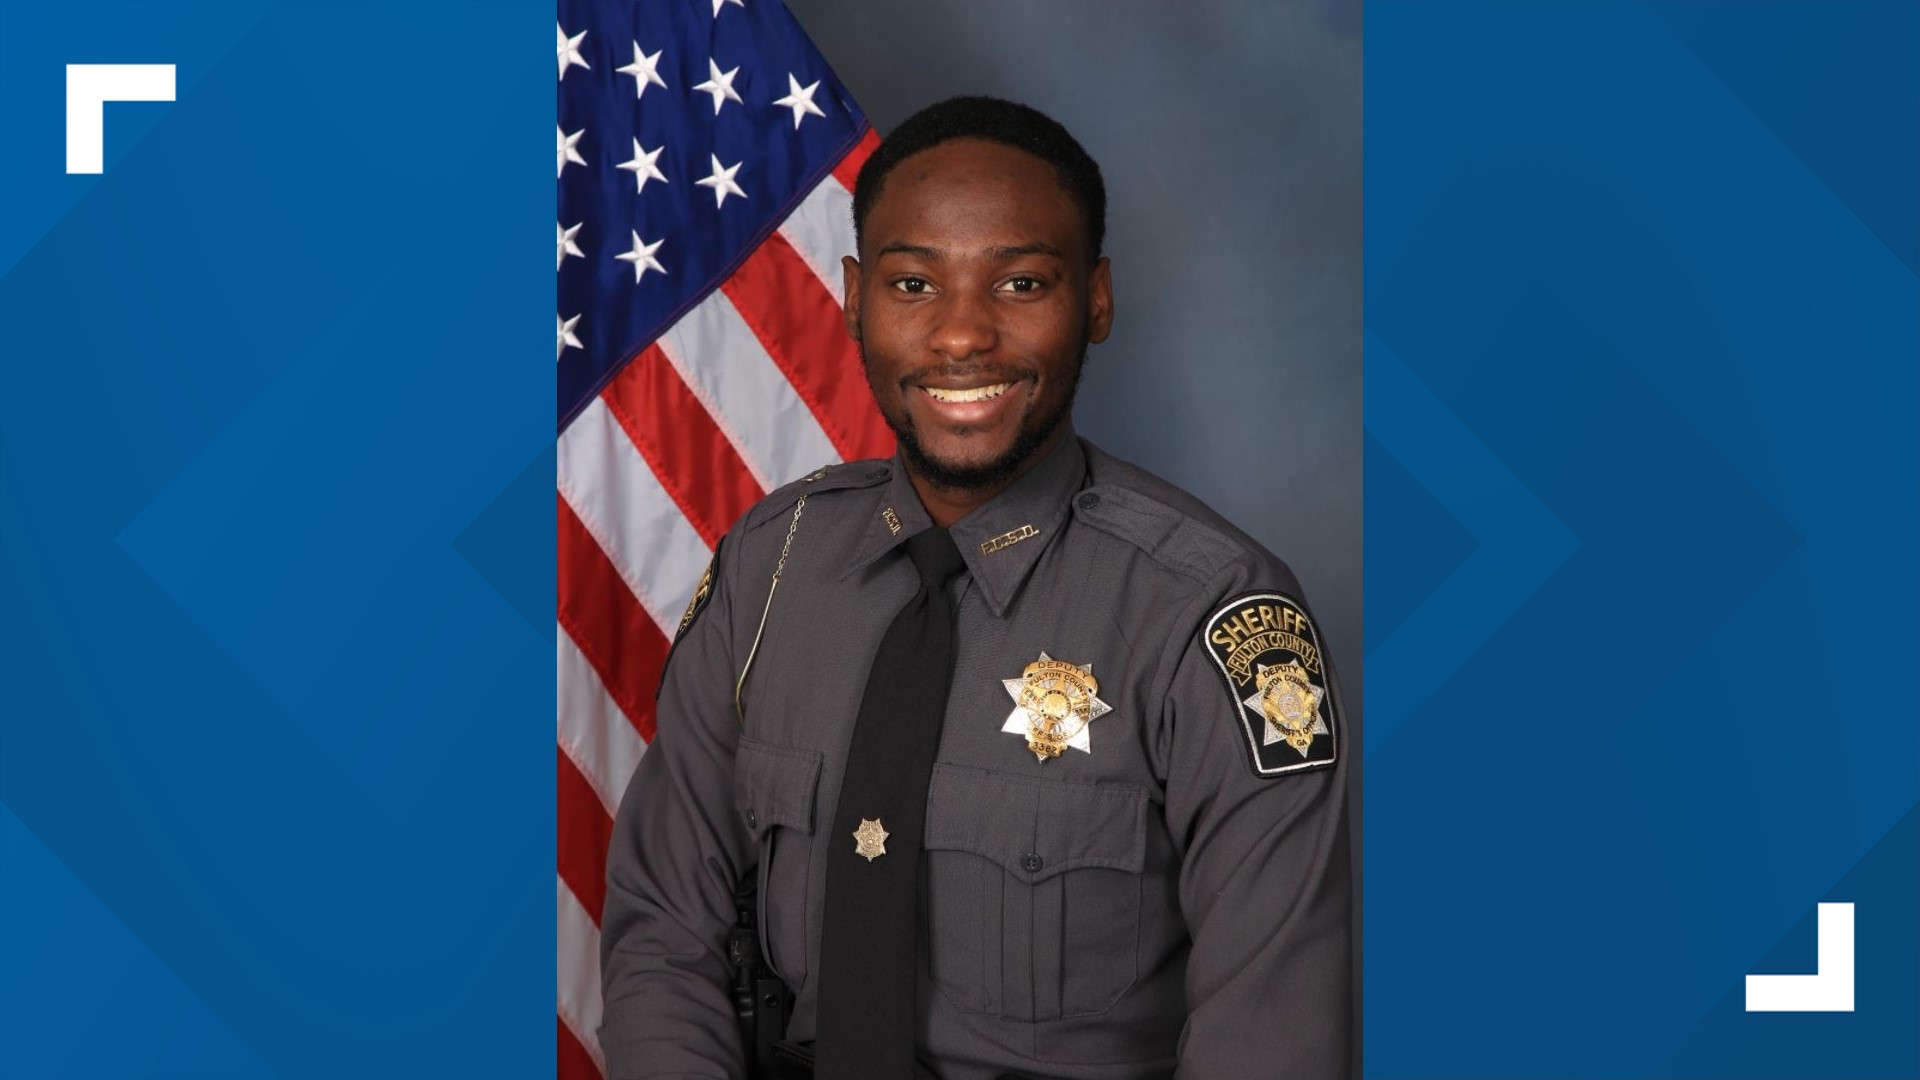 Deputy James Thomas, 24, was described by Sheriff Pat Labat on Thursday as an "outstanding young man" and the victim of a "heinous crime."